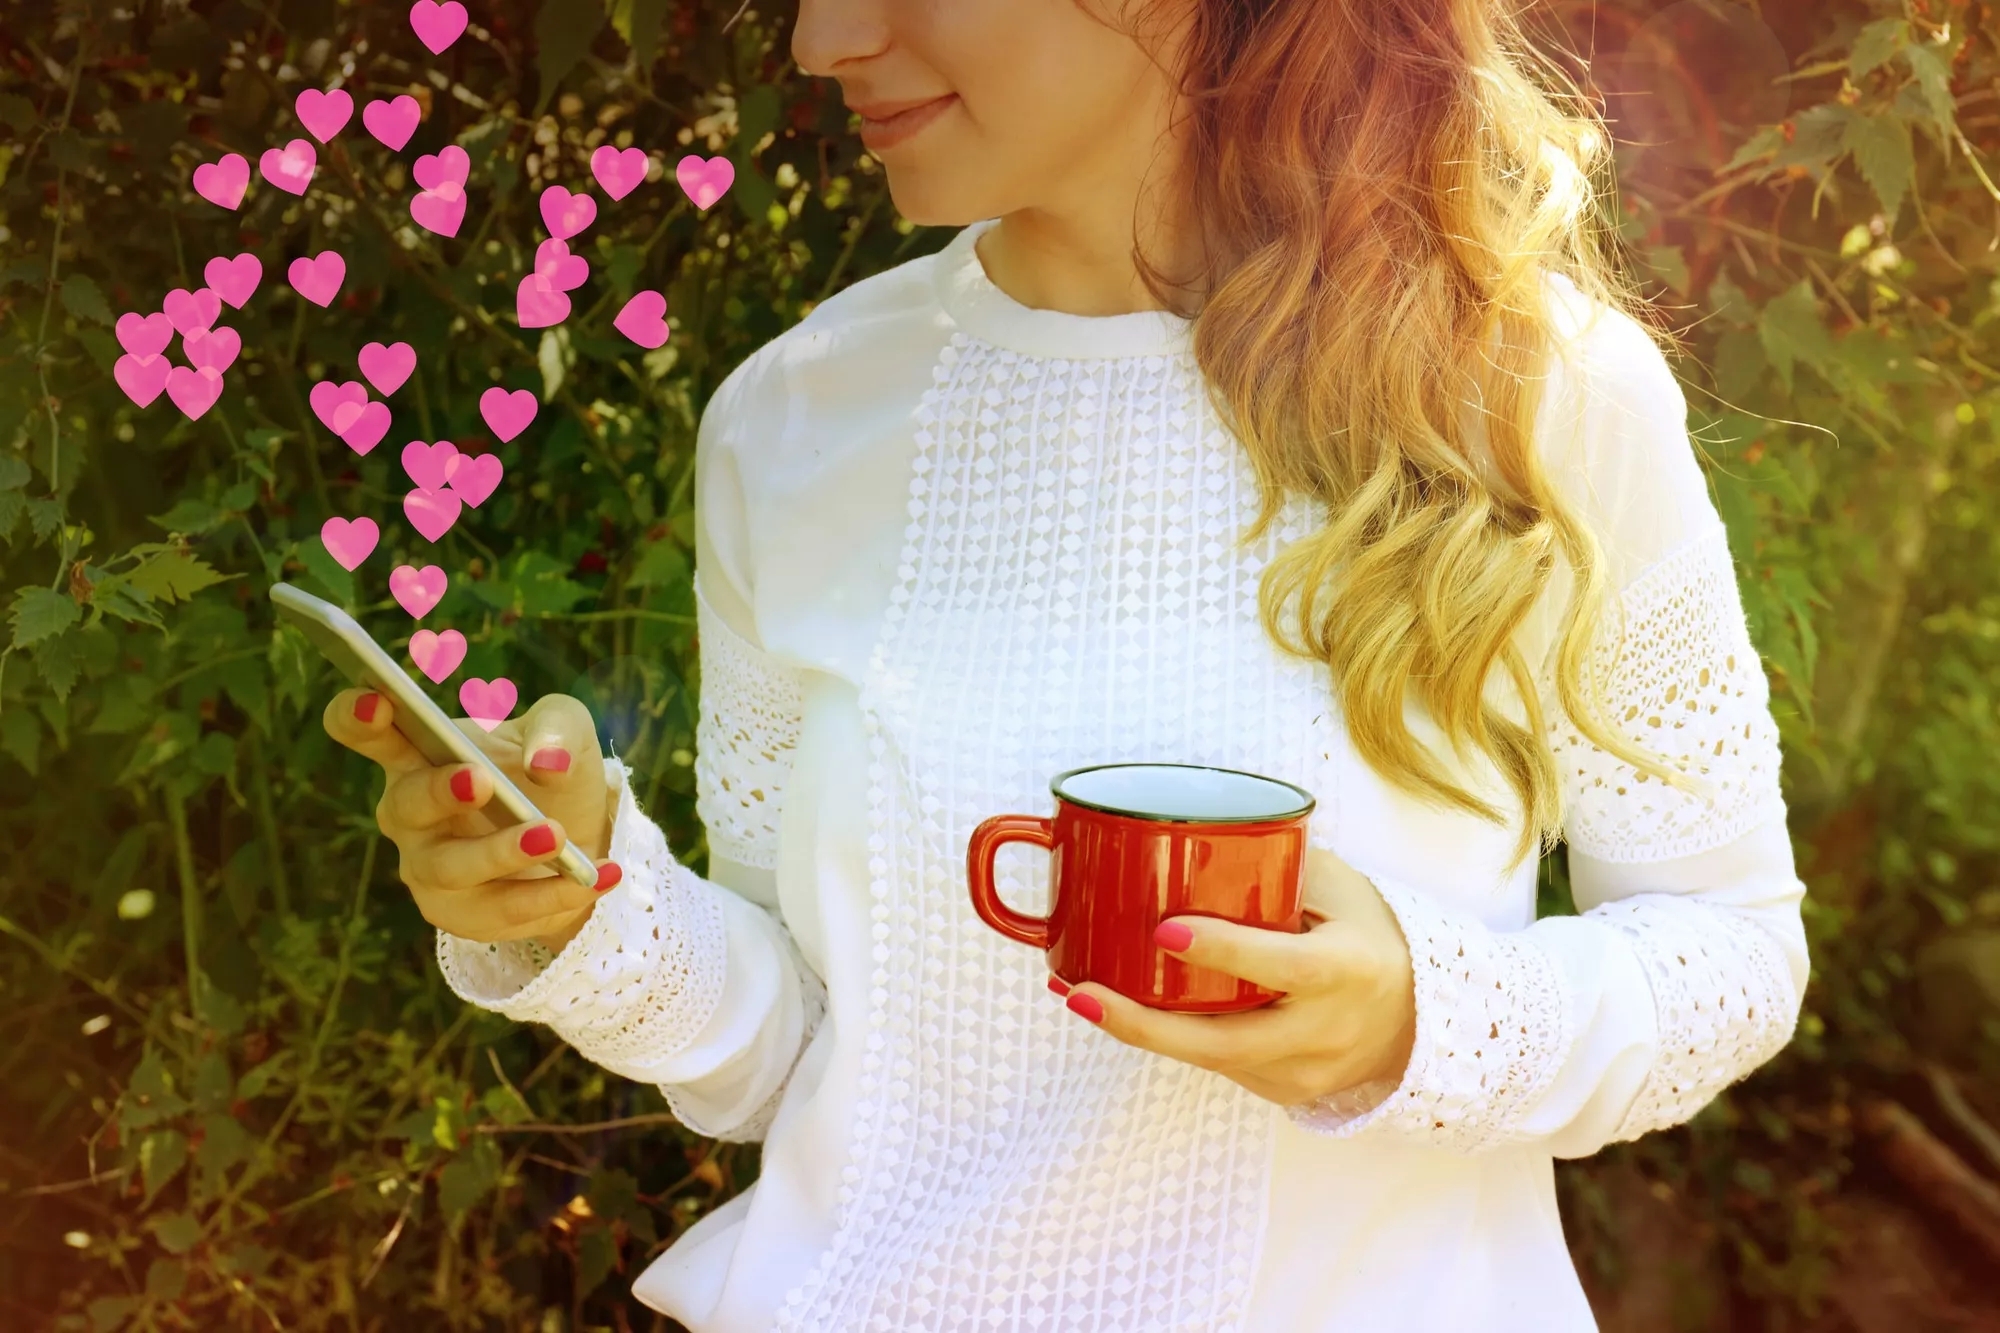 A woman is outside in front of some bushes, messaging on her phone, with heart emojis flying out, holding a mug in the other hand.